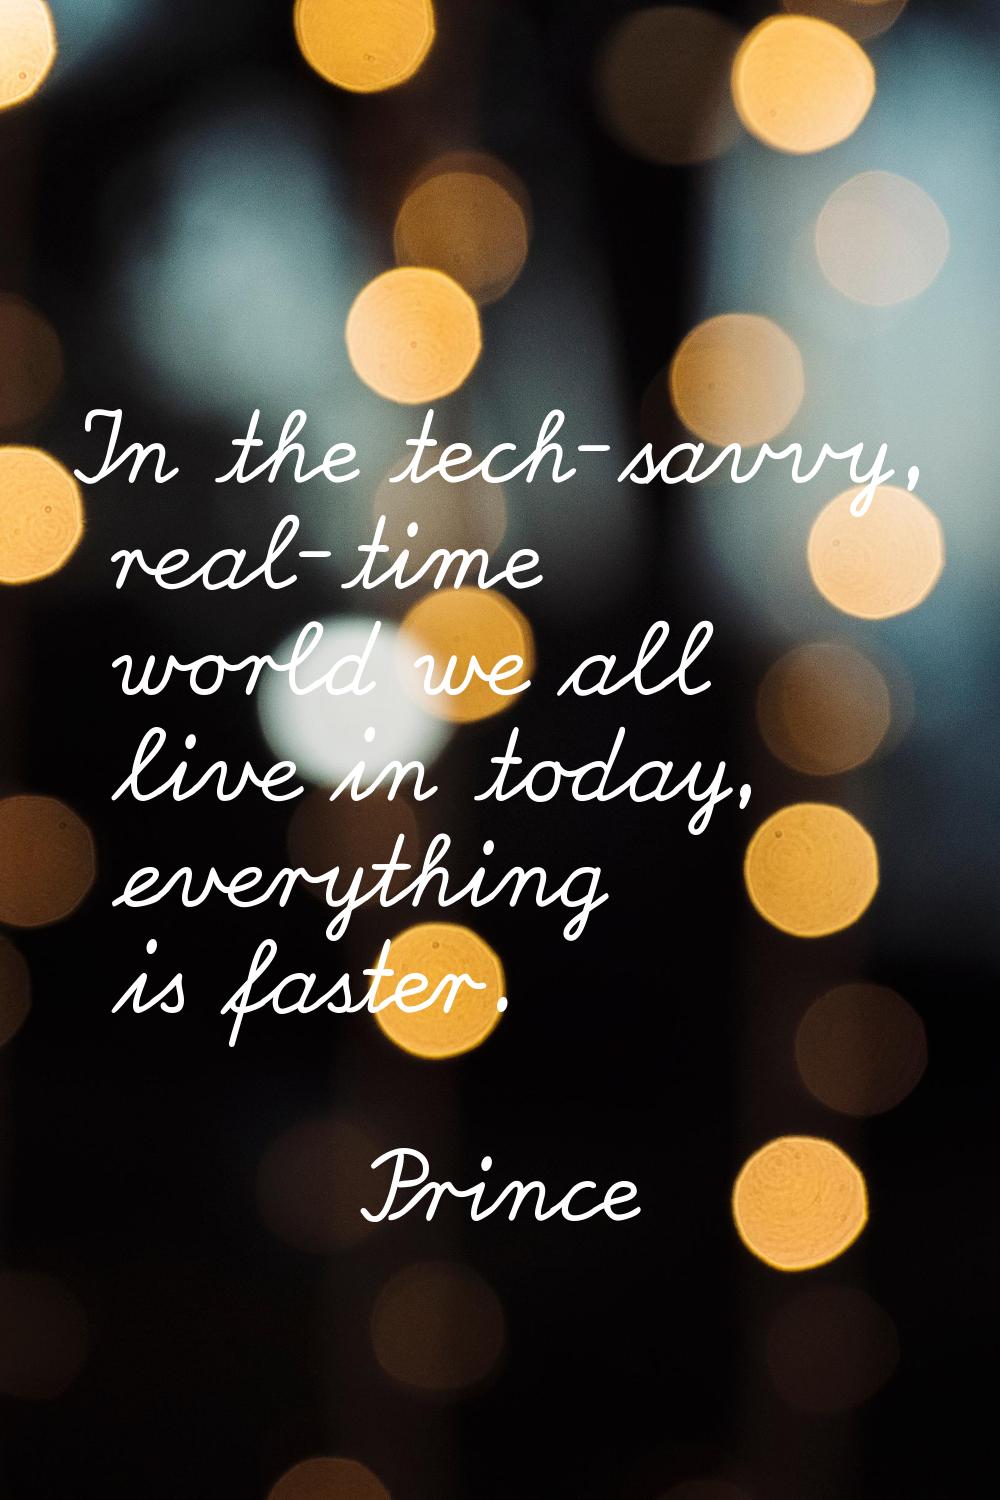 In the tech-savvy, real-time world we all live in today, everything is faster.